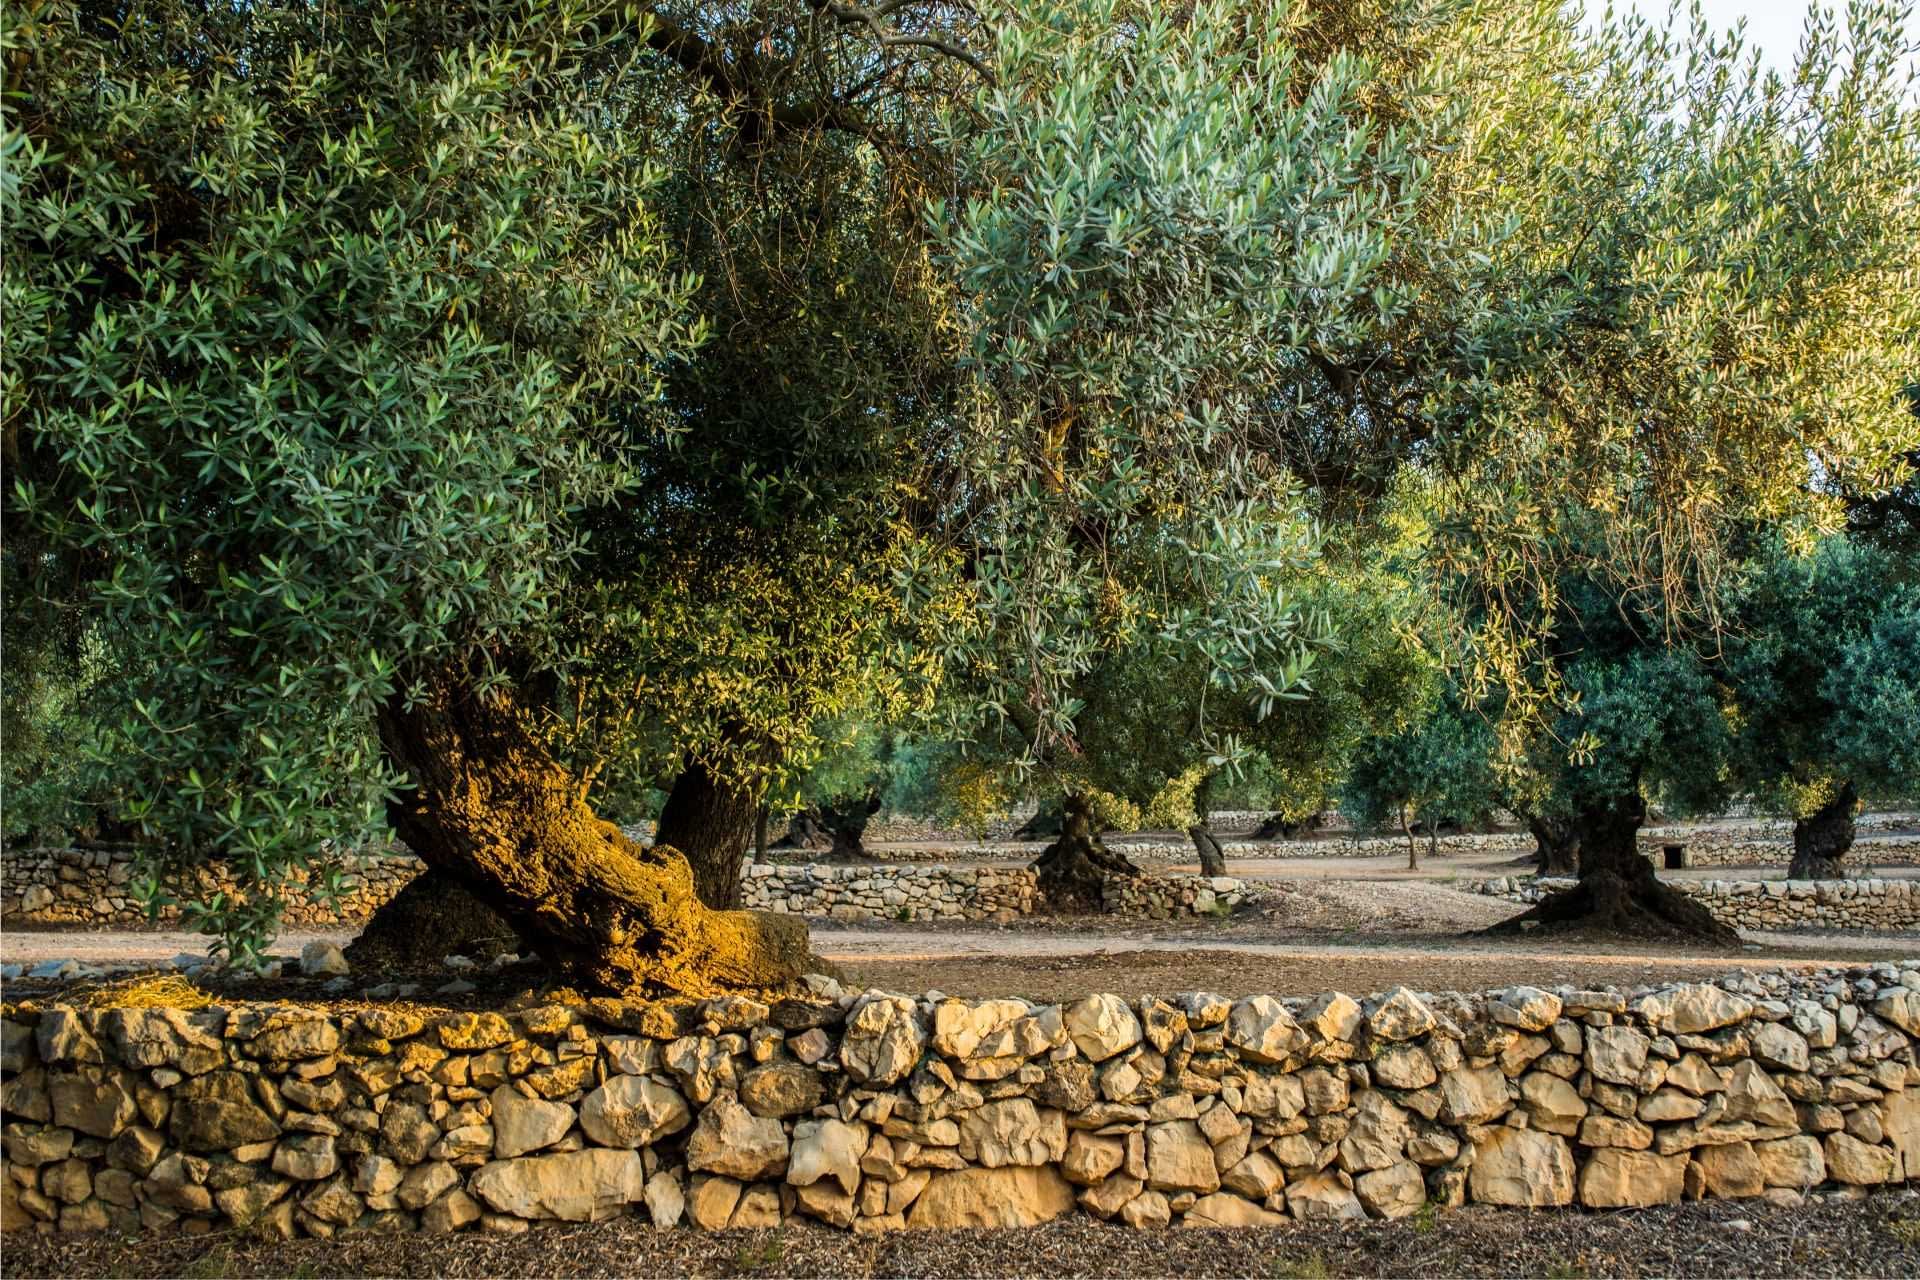 profiles-production-europe-catalan-producers-emphasize-history-and-sustainability-in-tourism-initiative-olive-oil-times